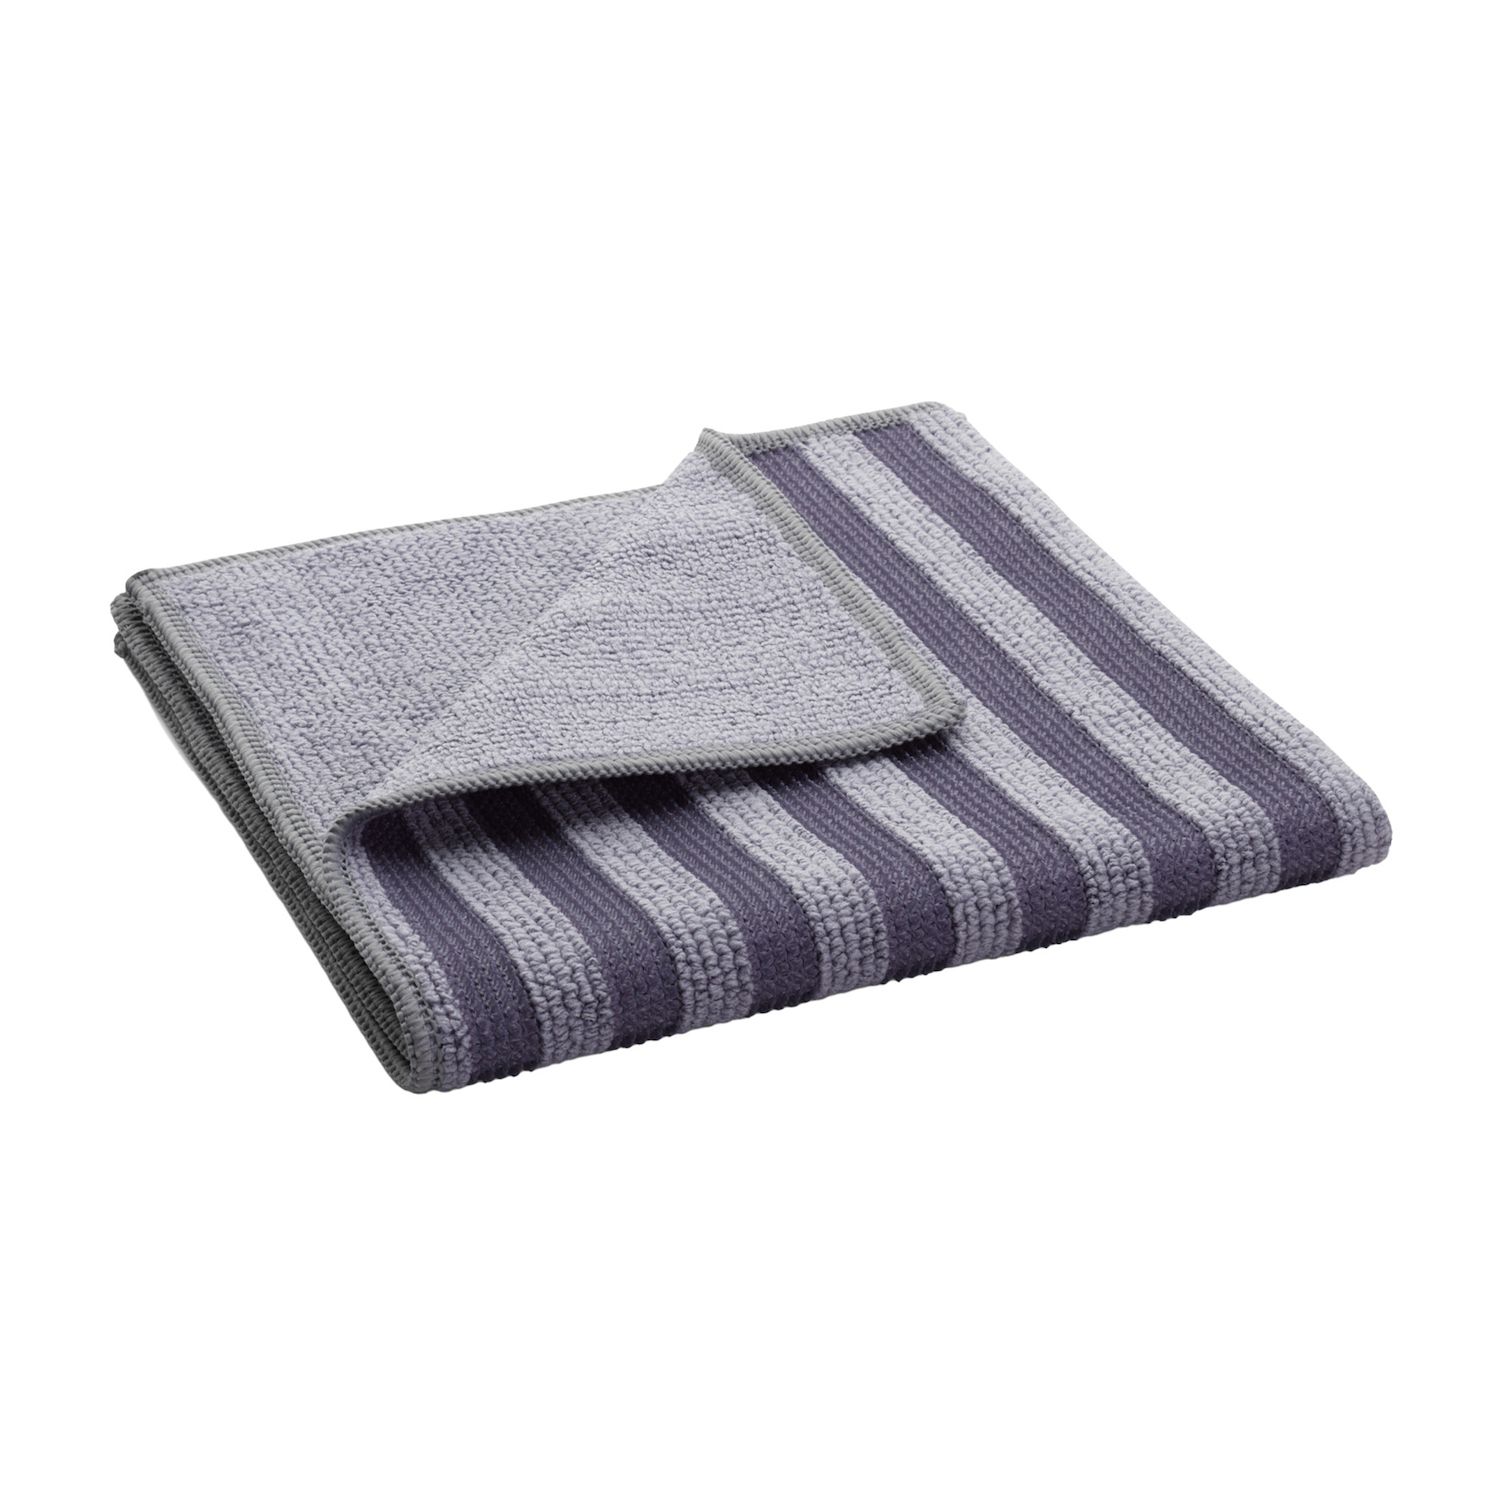 Image for E-Cloth Stainless Steel Microfiber Cleaning Cloth at Kohl's.